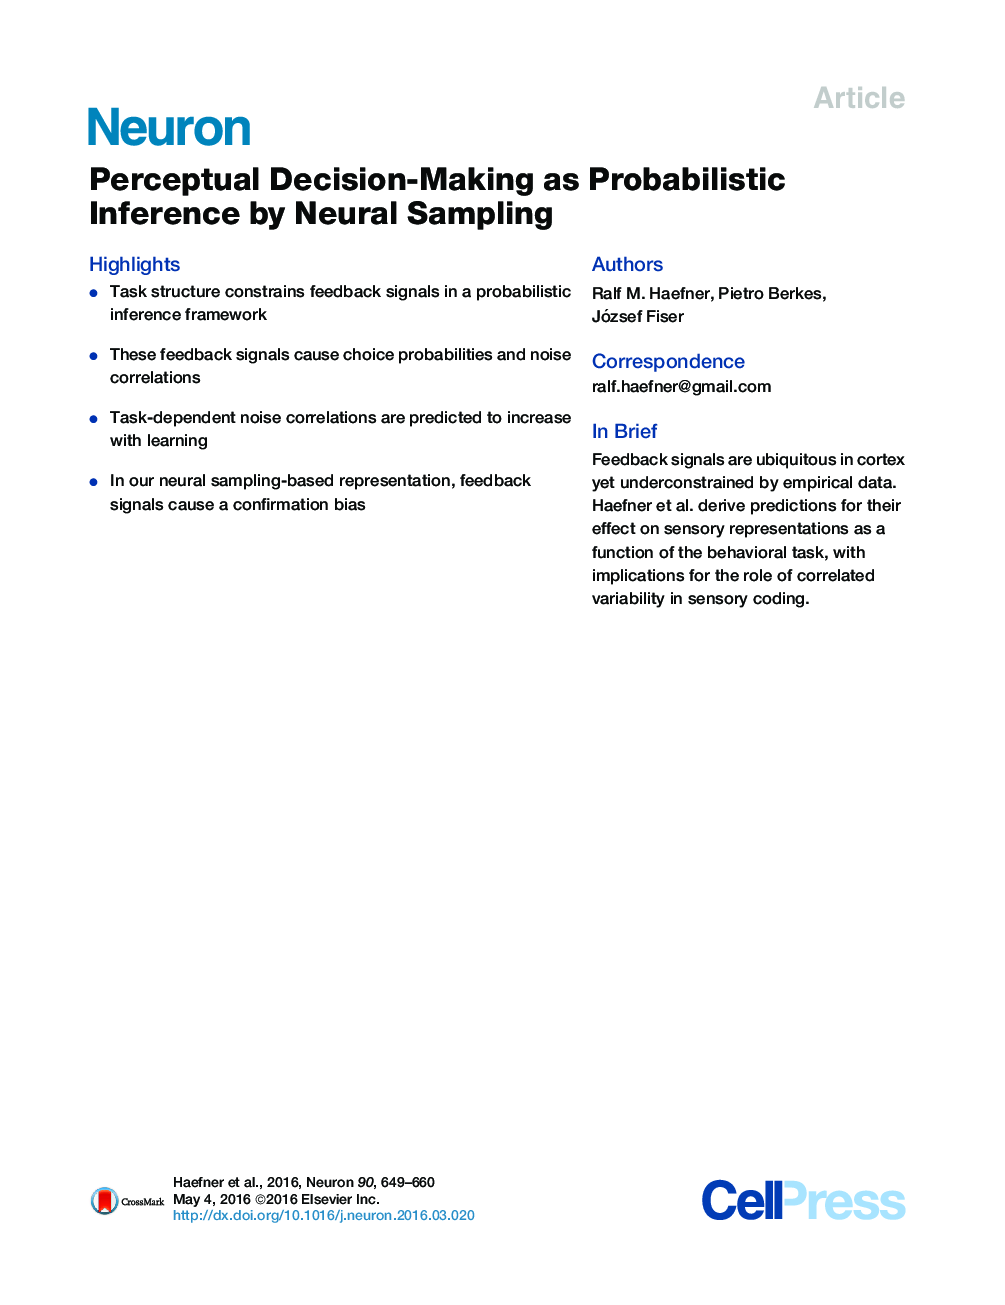 Perceptual Decision-Making as Probabilistic Inference by Neural Sampling